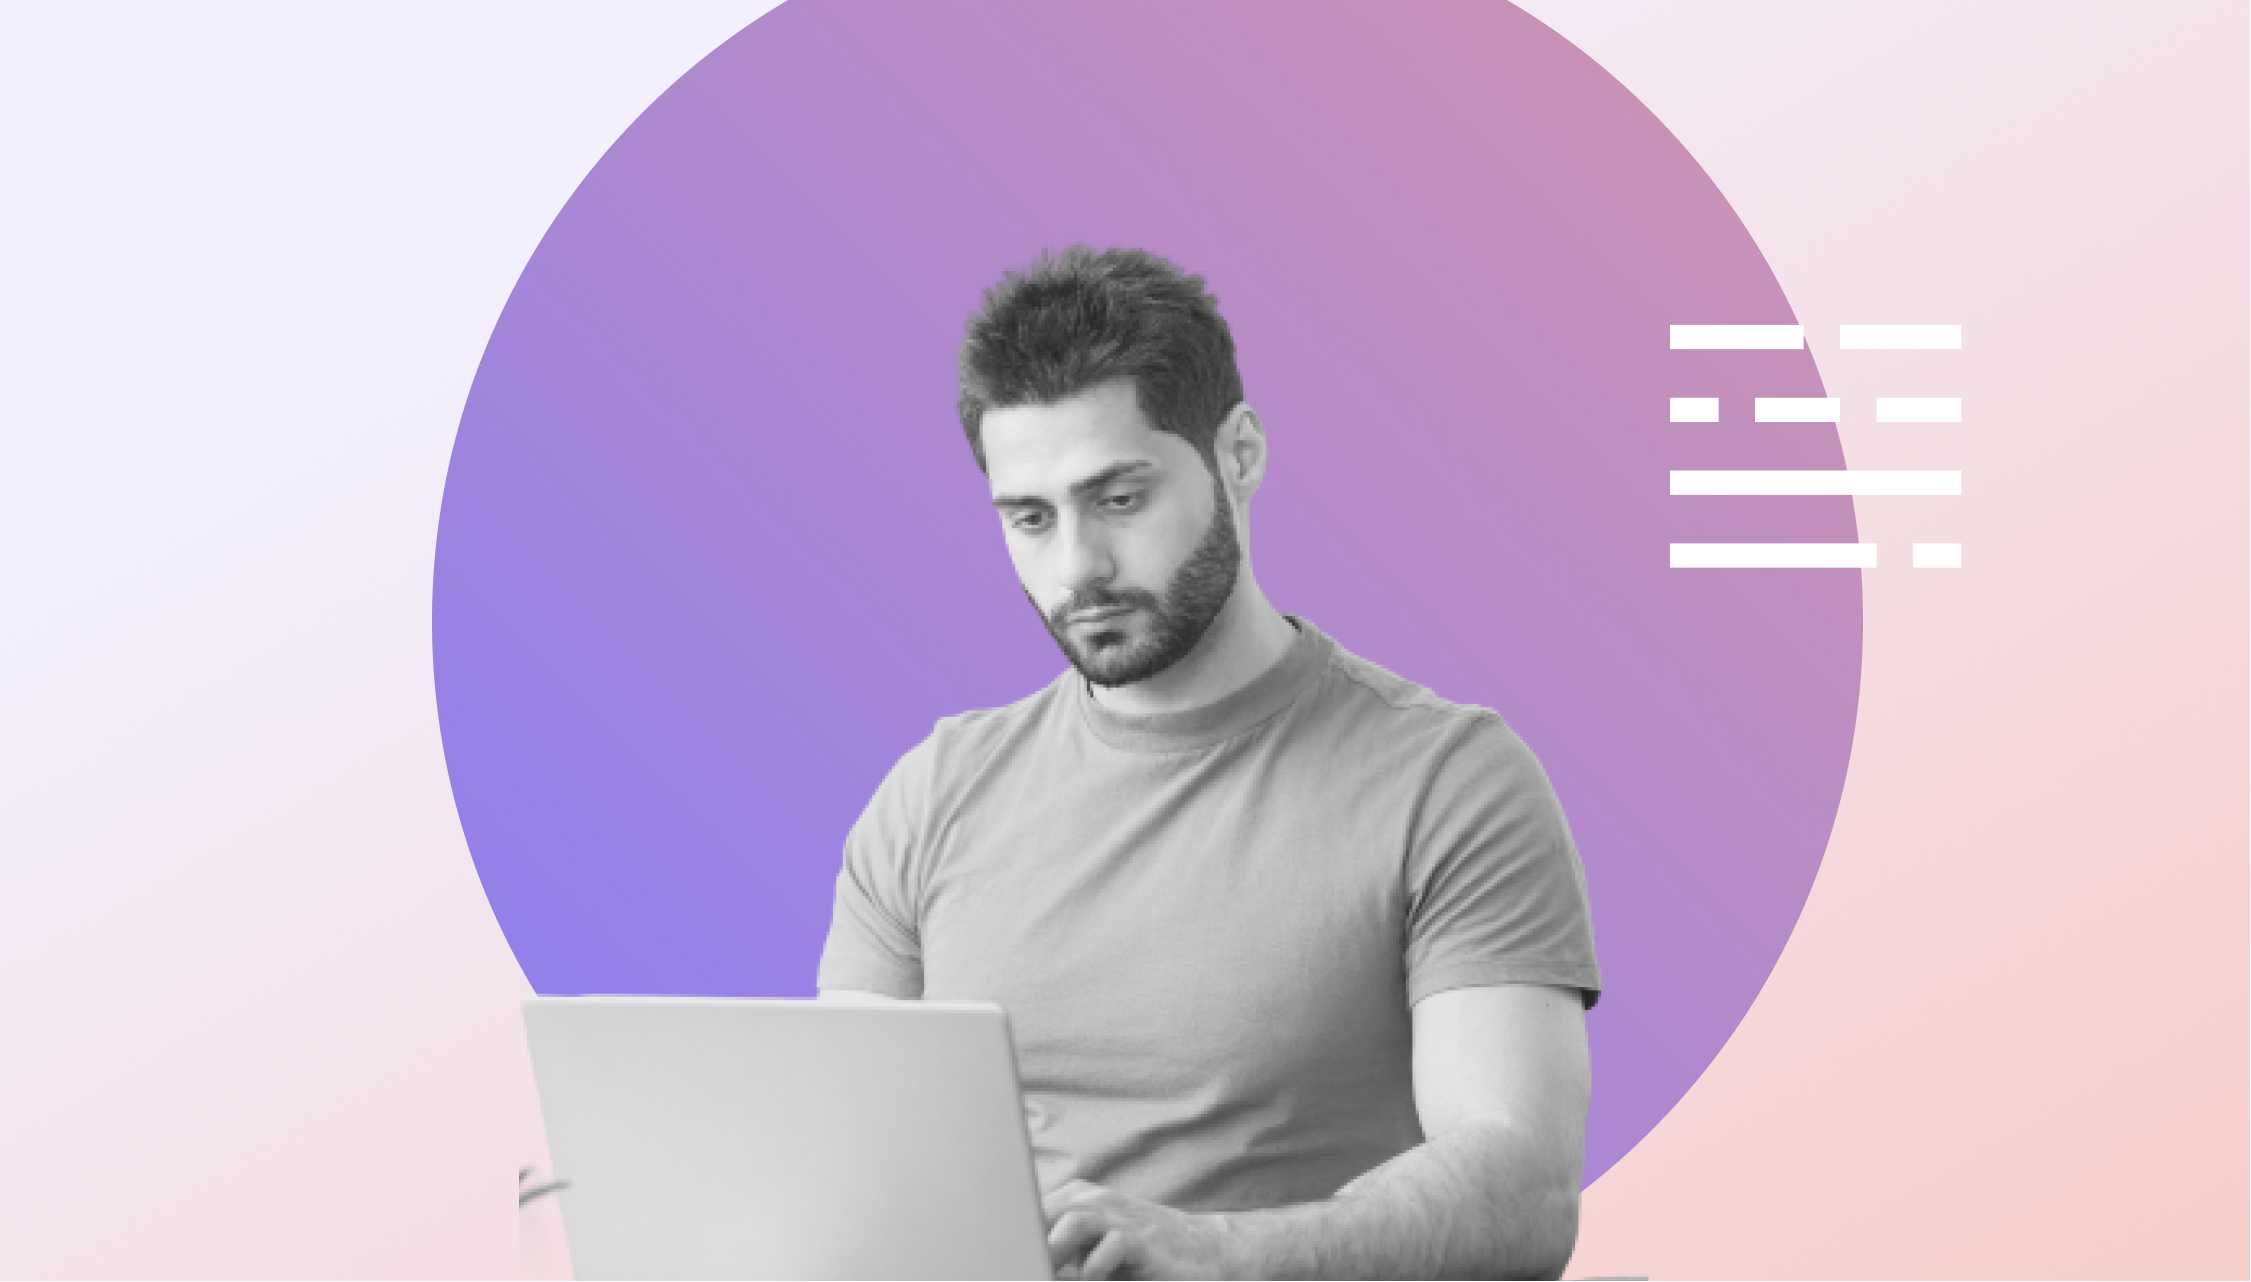 Man with beard for laptop and a purple circle and icon for subdomains